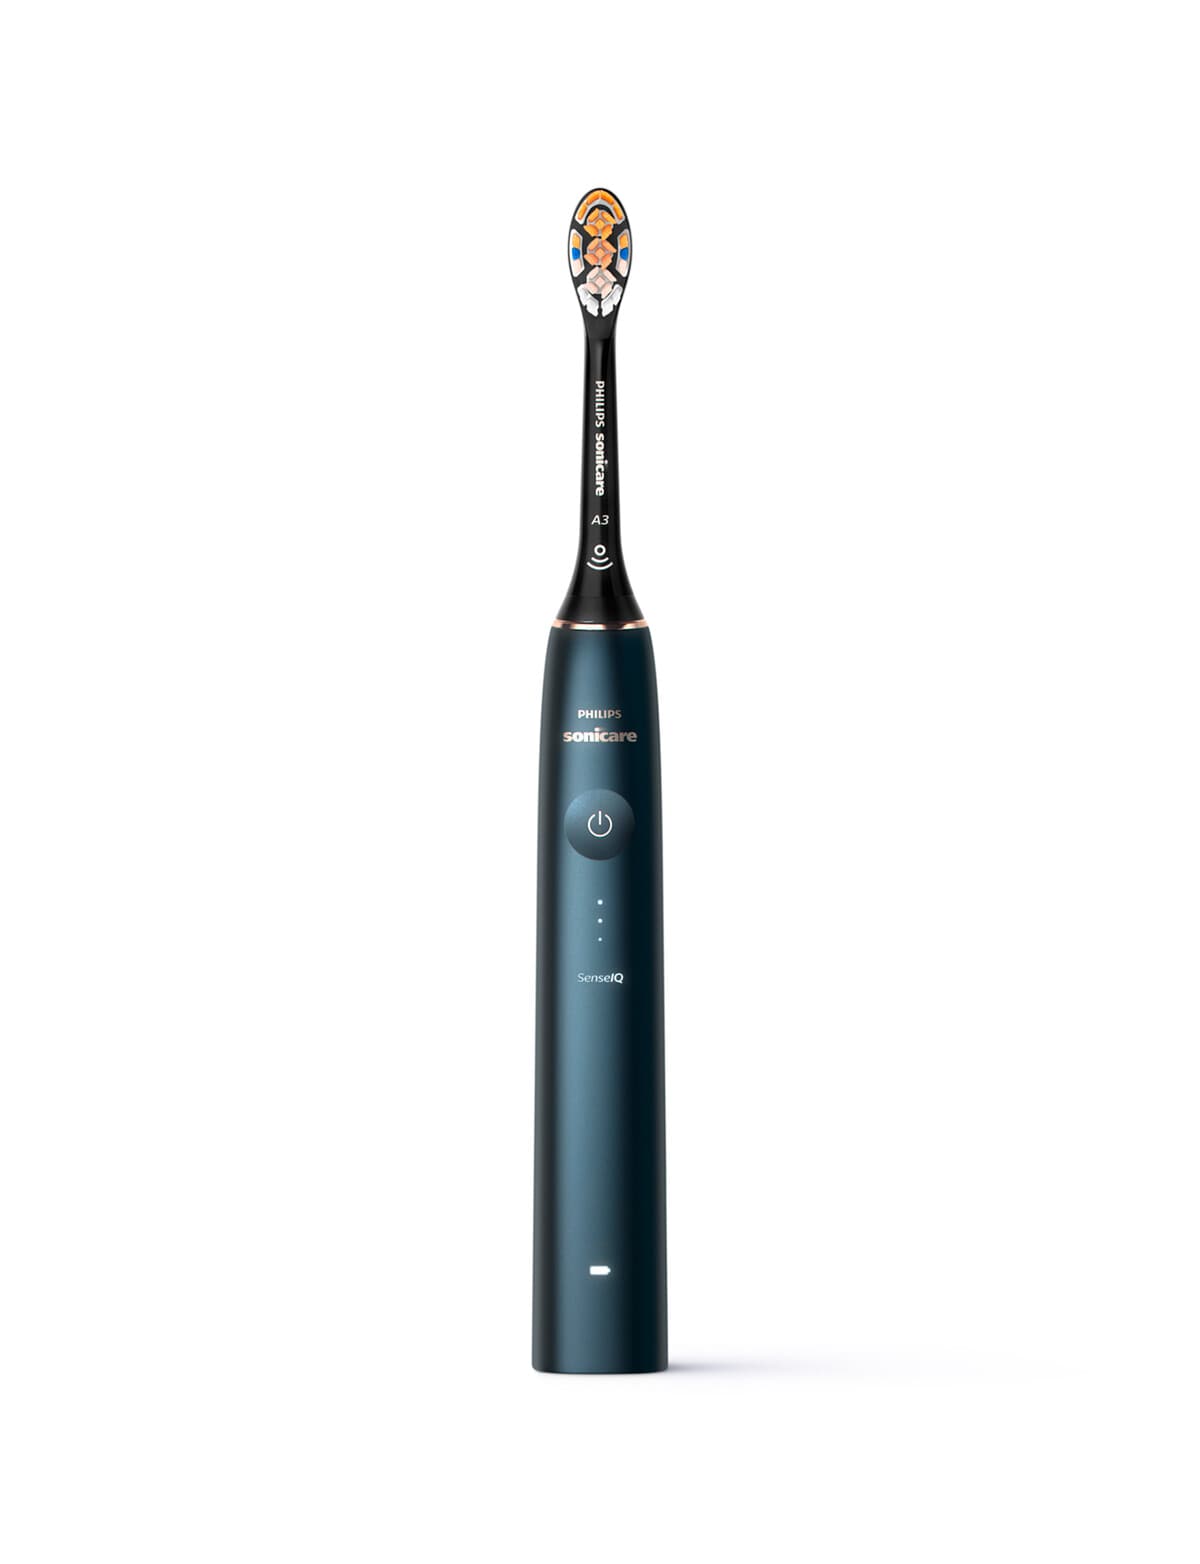 Philips Sonicare Prestige 9900 Electric Toothbrush, Midnight Blue,  HX9992/22 - Electric Toothbrushes